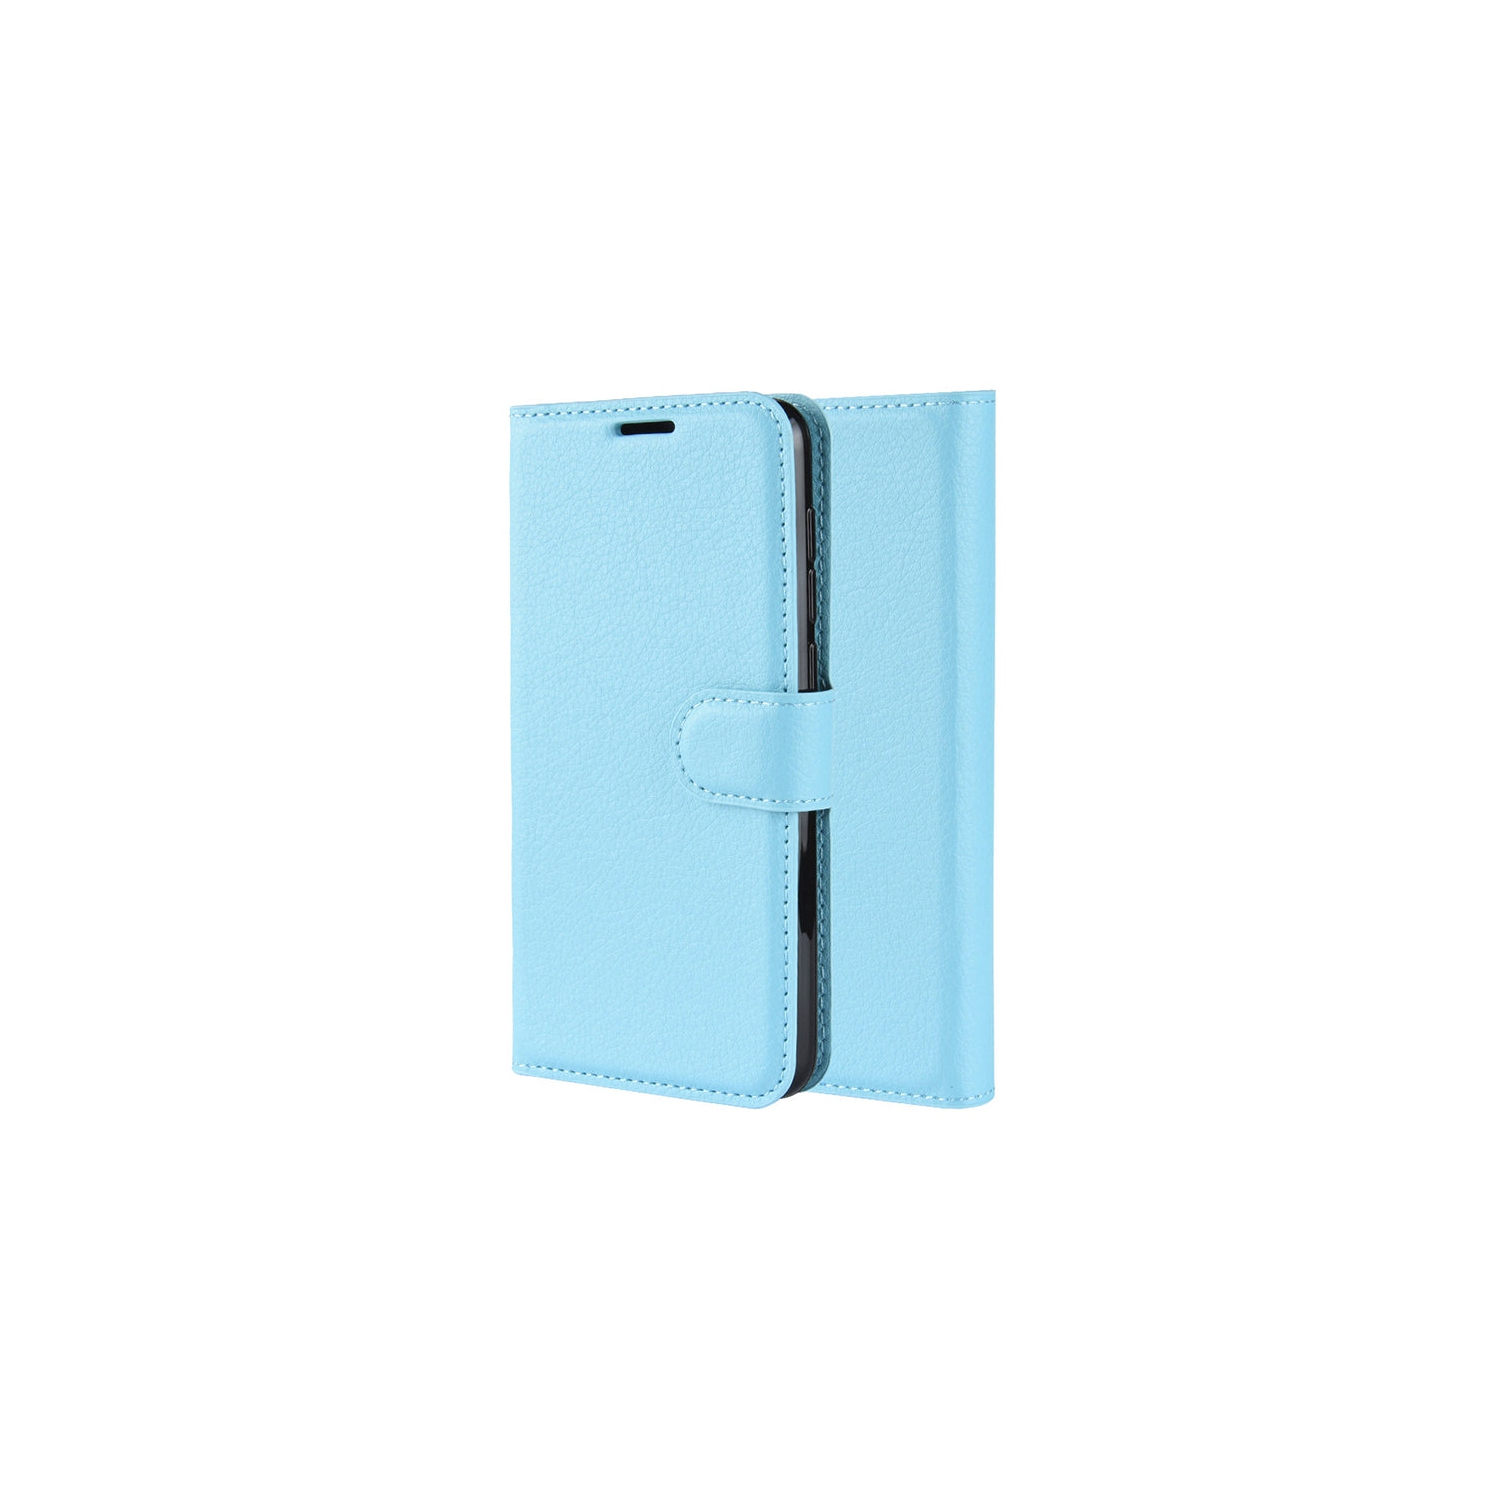 PANDACO Light Blue Leather Wallet Case for iPhone 13 Mini